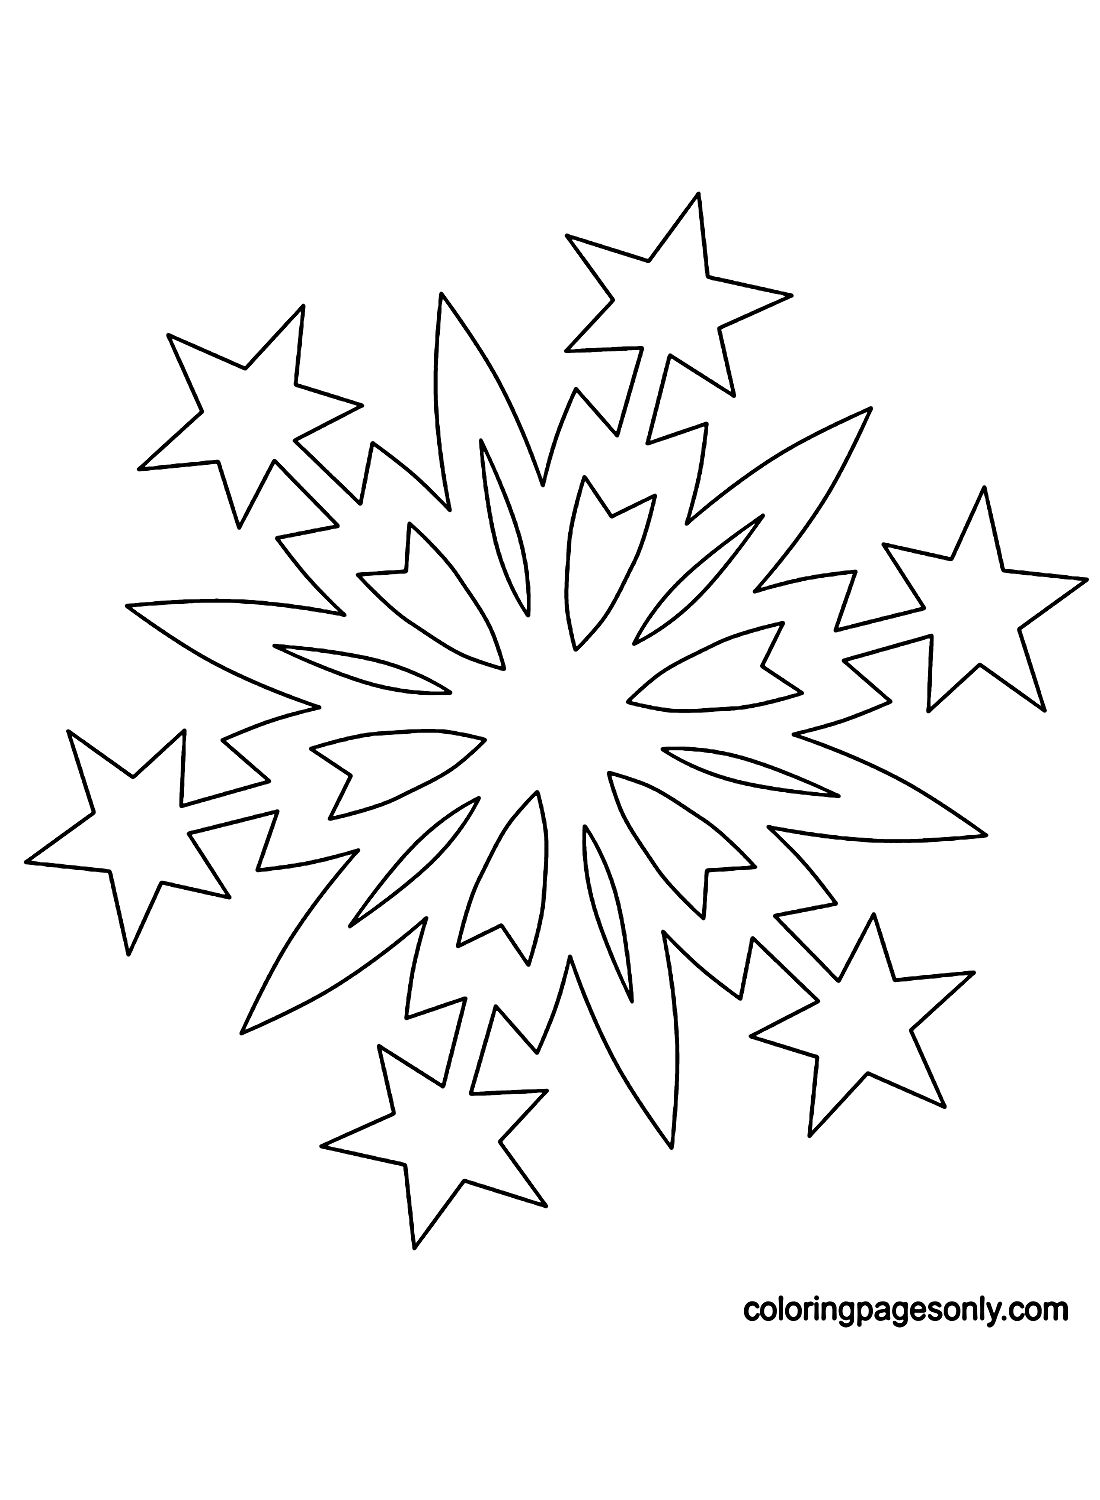 Snowflake with Christmas Stars Coloring Page